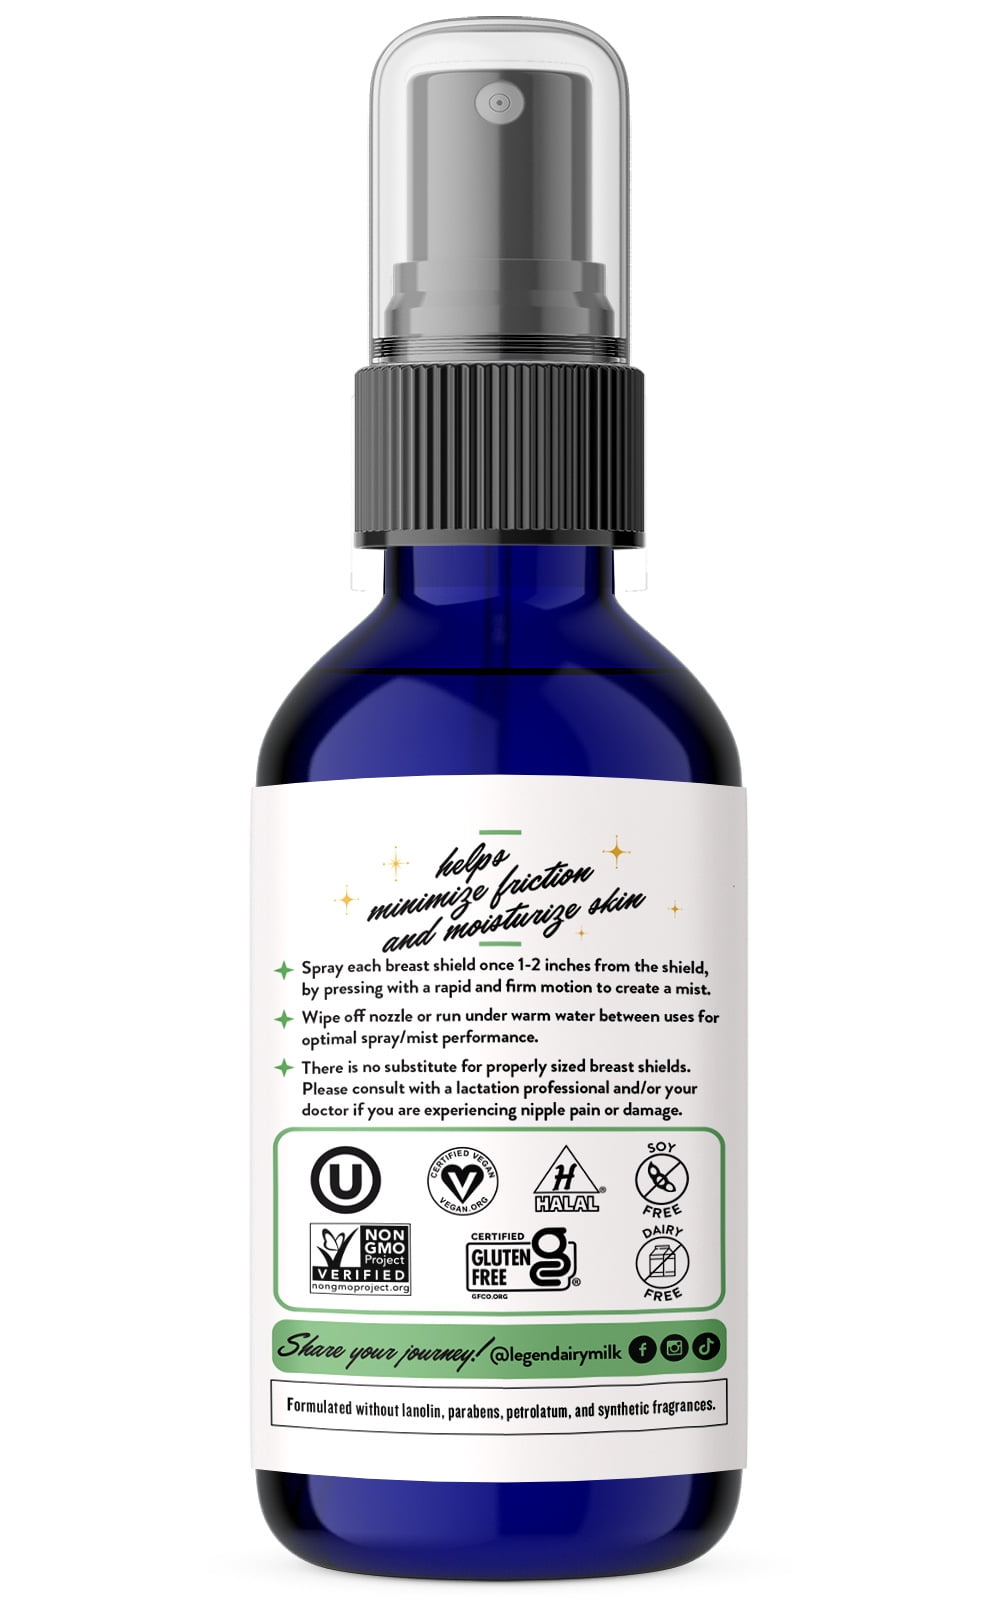  Organic Pumping Spray, Pump Spray Breastfeeding, Breast Pumping  Oil, Nipple Spray Pumping, Breast Pump Spray, Lubricant for Breast Shields  and Flanges, Prevents Sore Nipples - 2 Oz : Baby